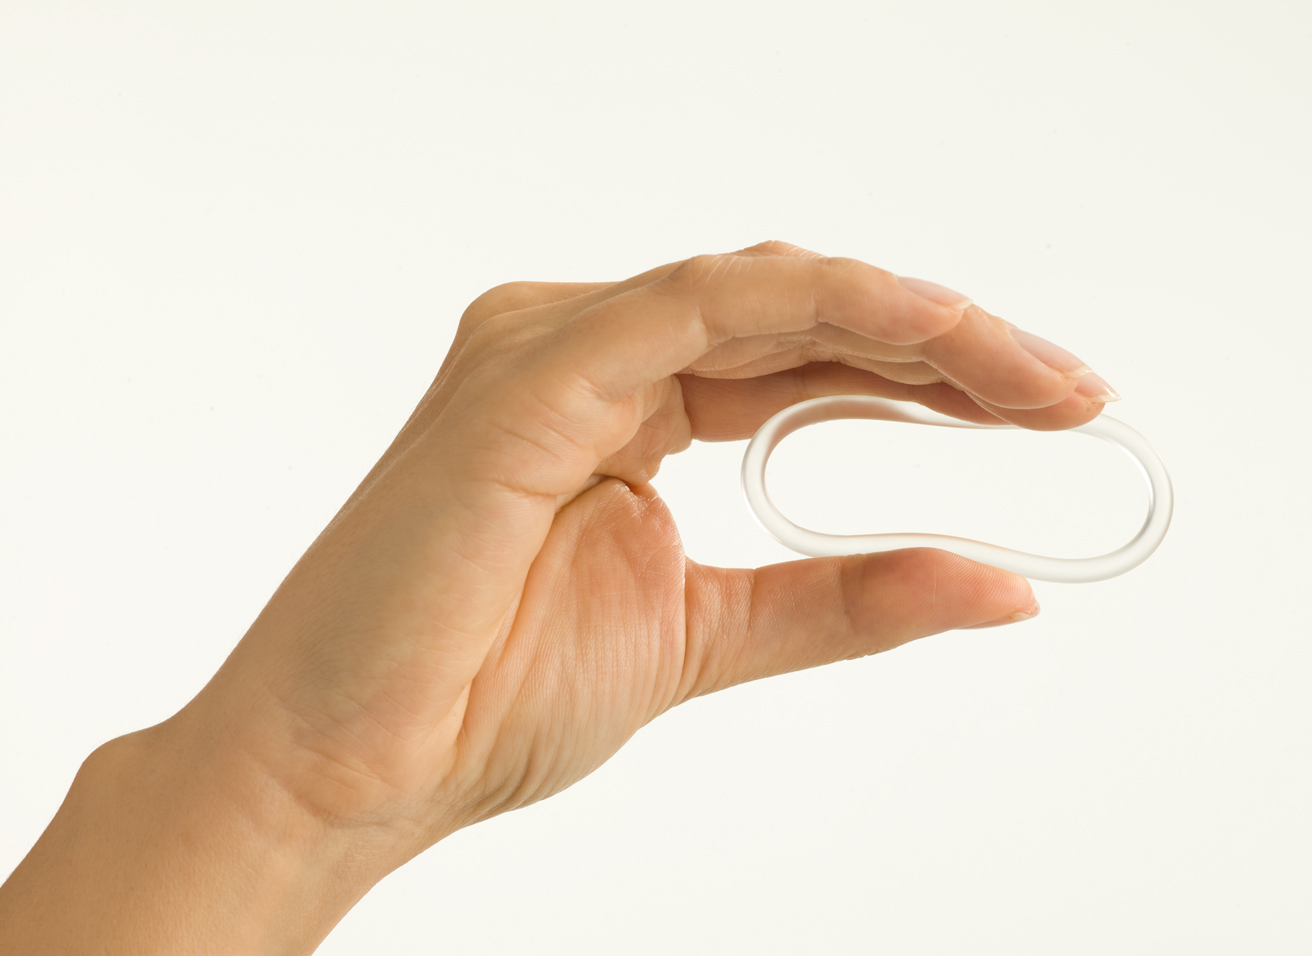 Advantages and Disadvantages of the Contraceptive Vaginal Ring